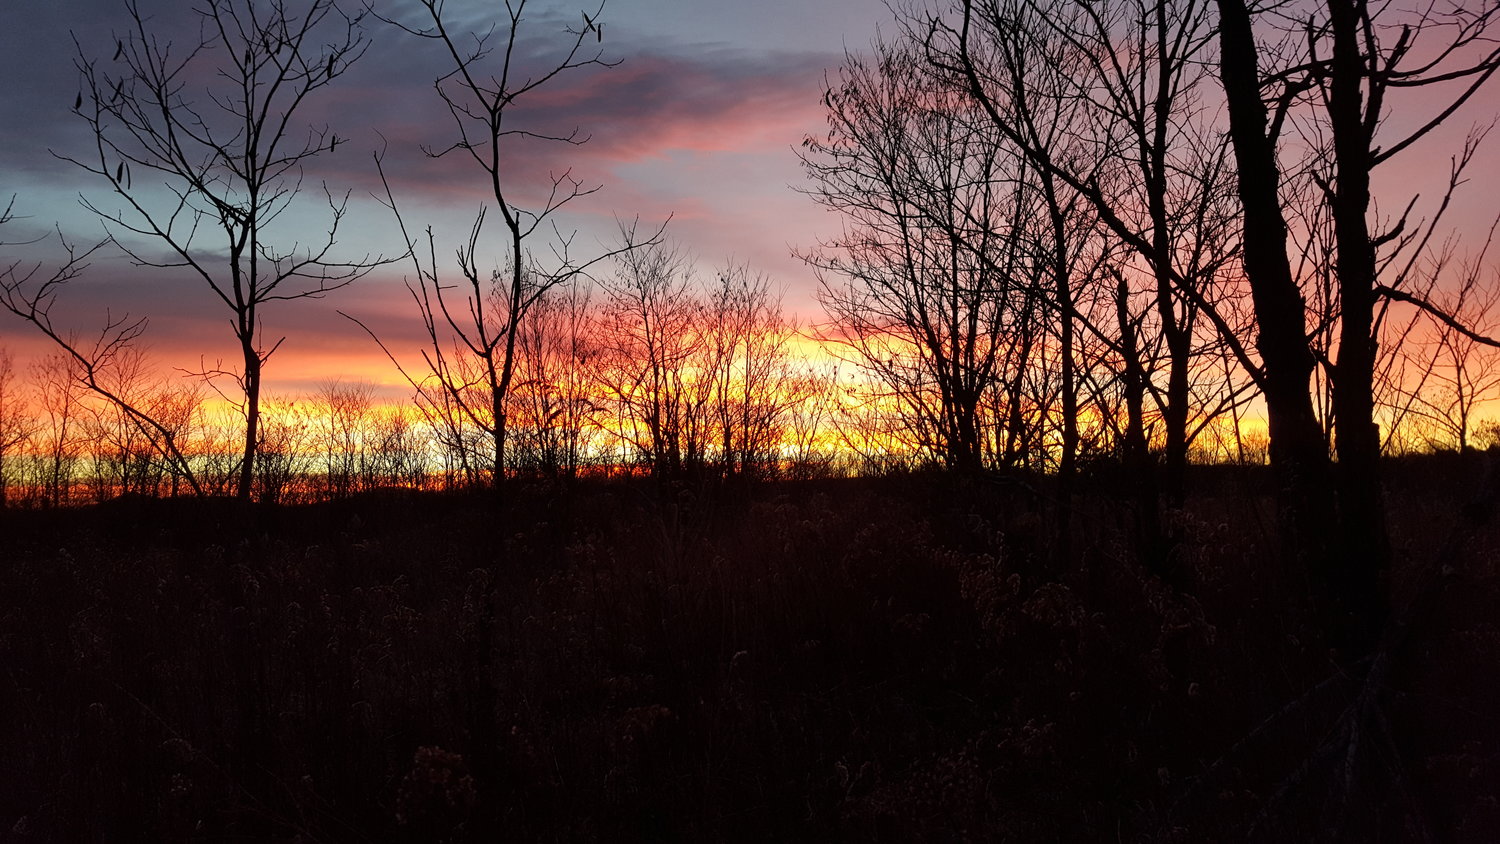 Taken from his deer stand in 2015, on the day Siers bagged his 10-point, he was treated to this sunrise.